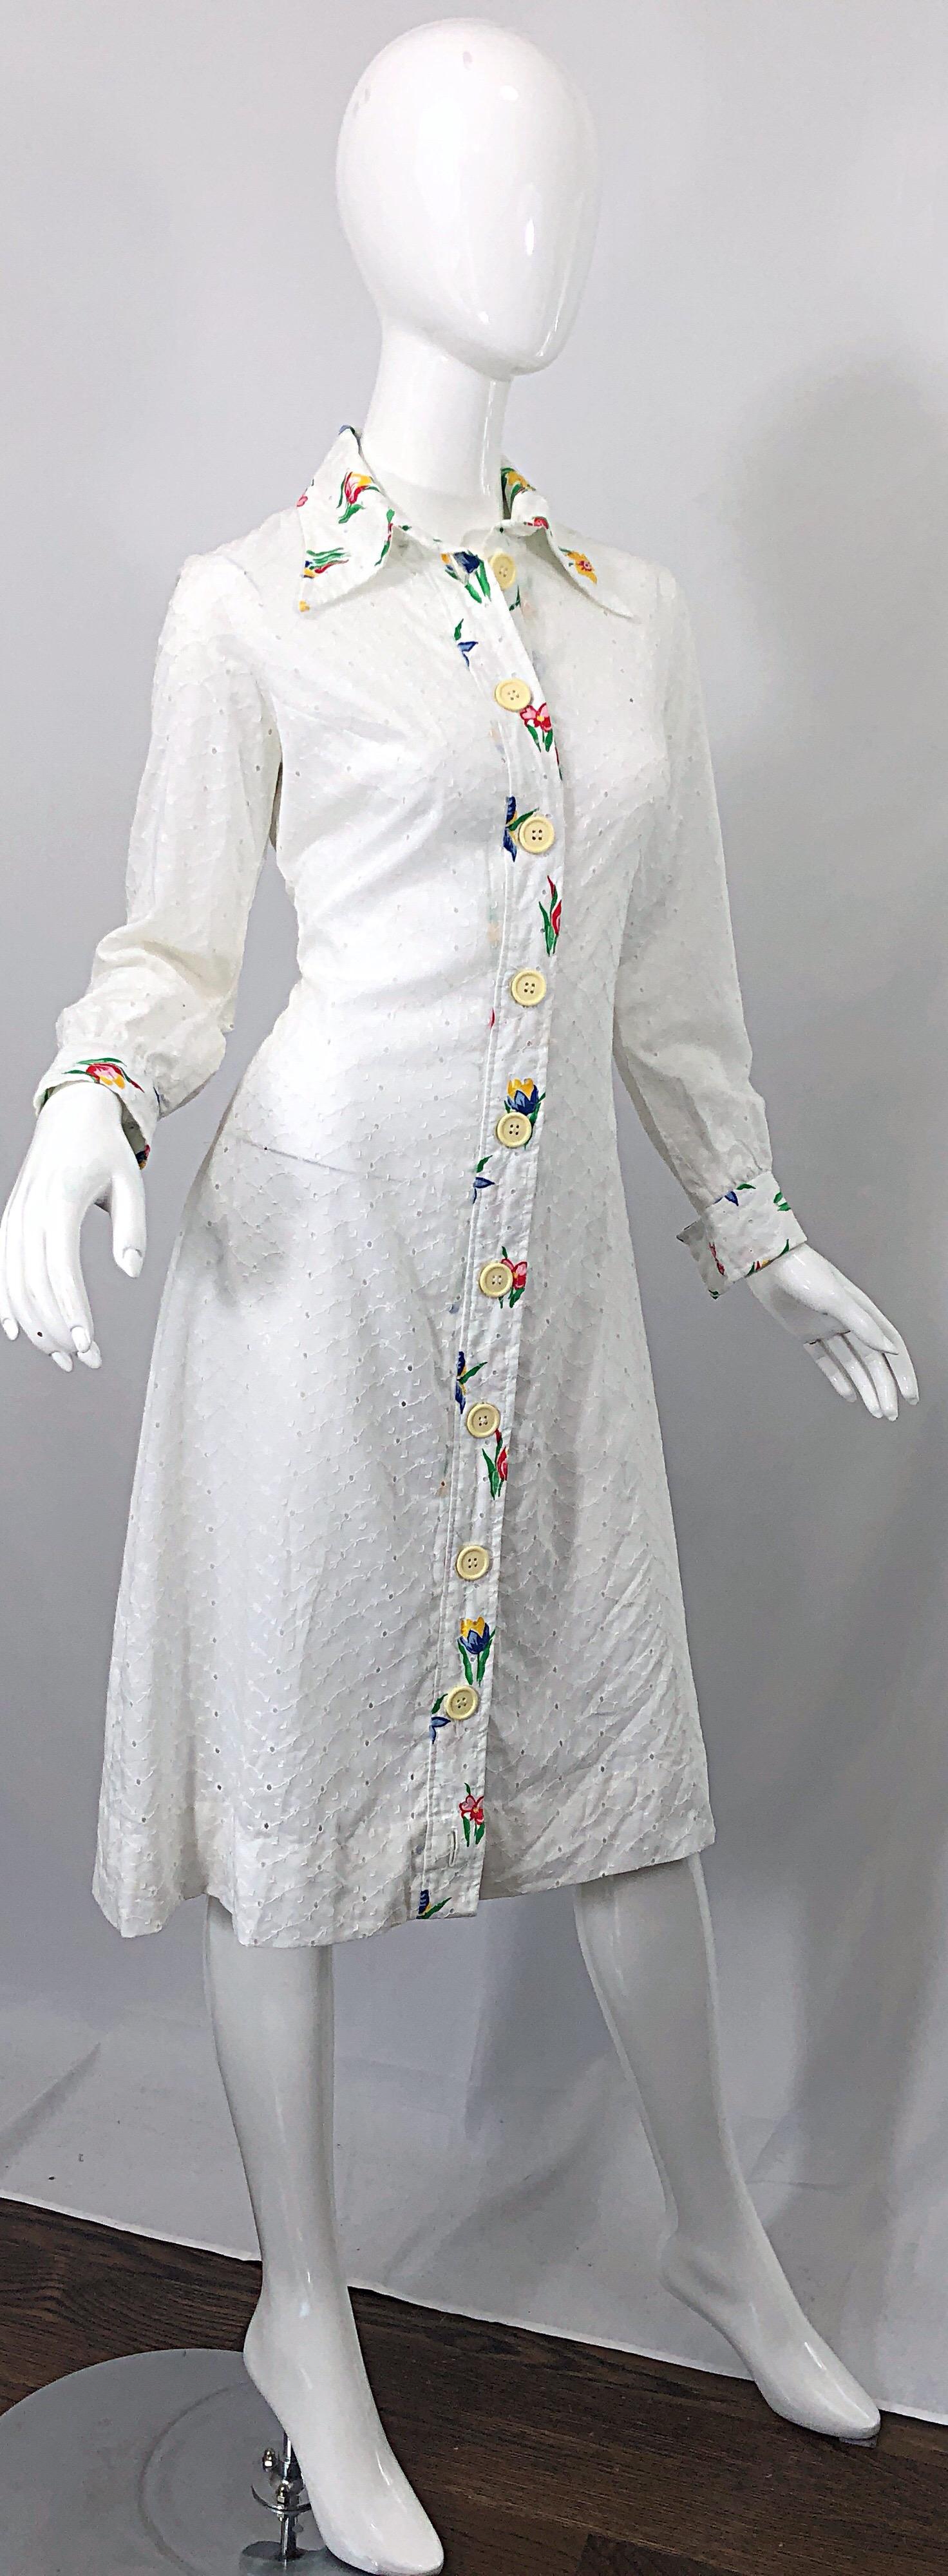 1970s Joseph Magnin White Eyelet Cotton Embrodiered Vintage 70s Shirt Dress For Sale 7